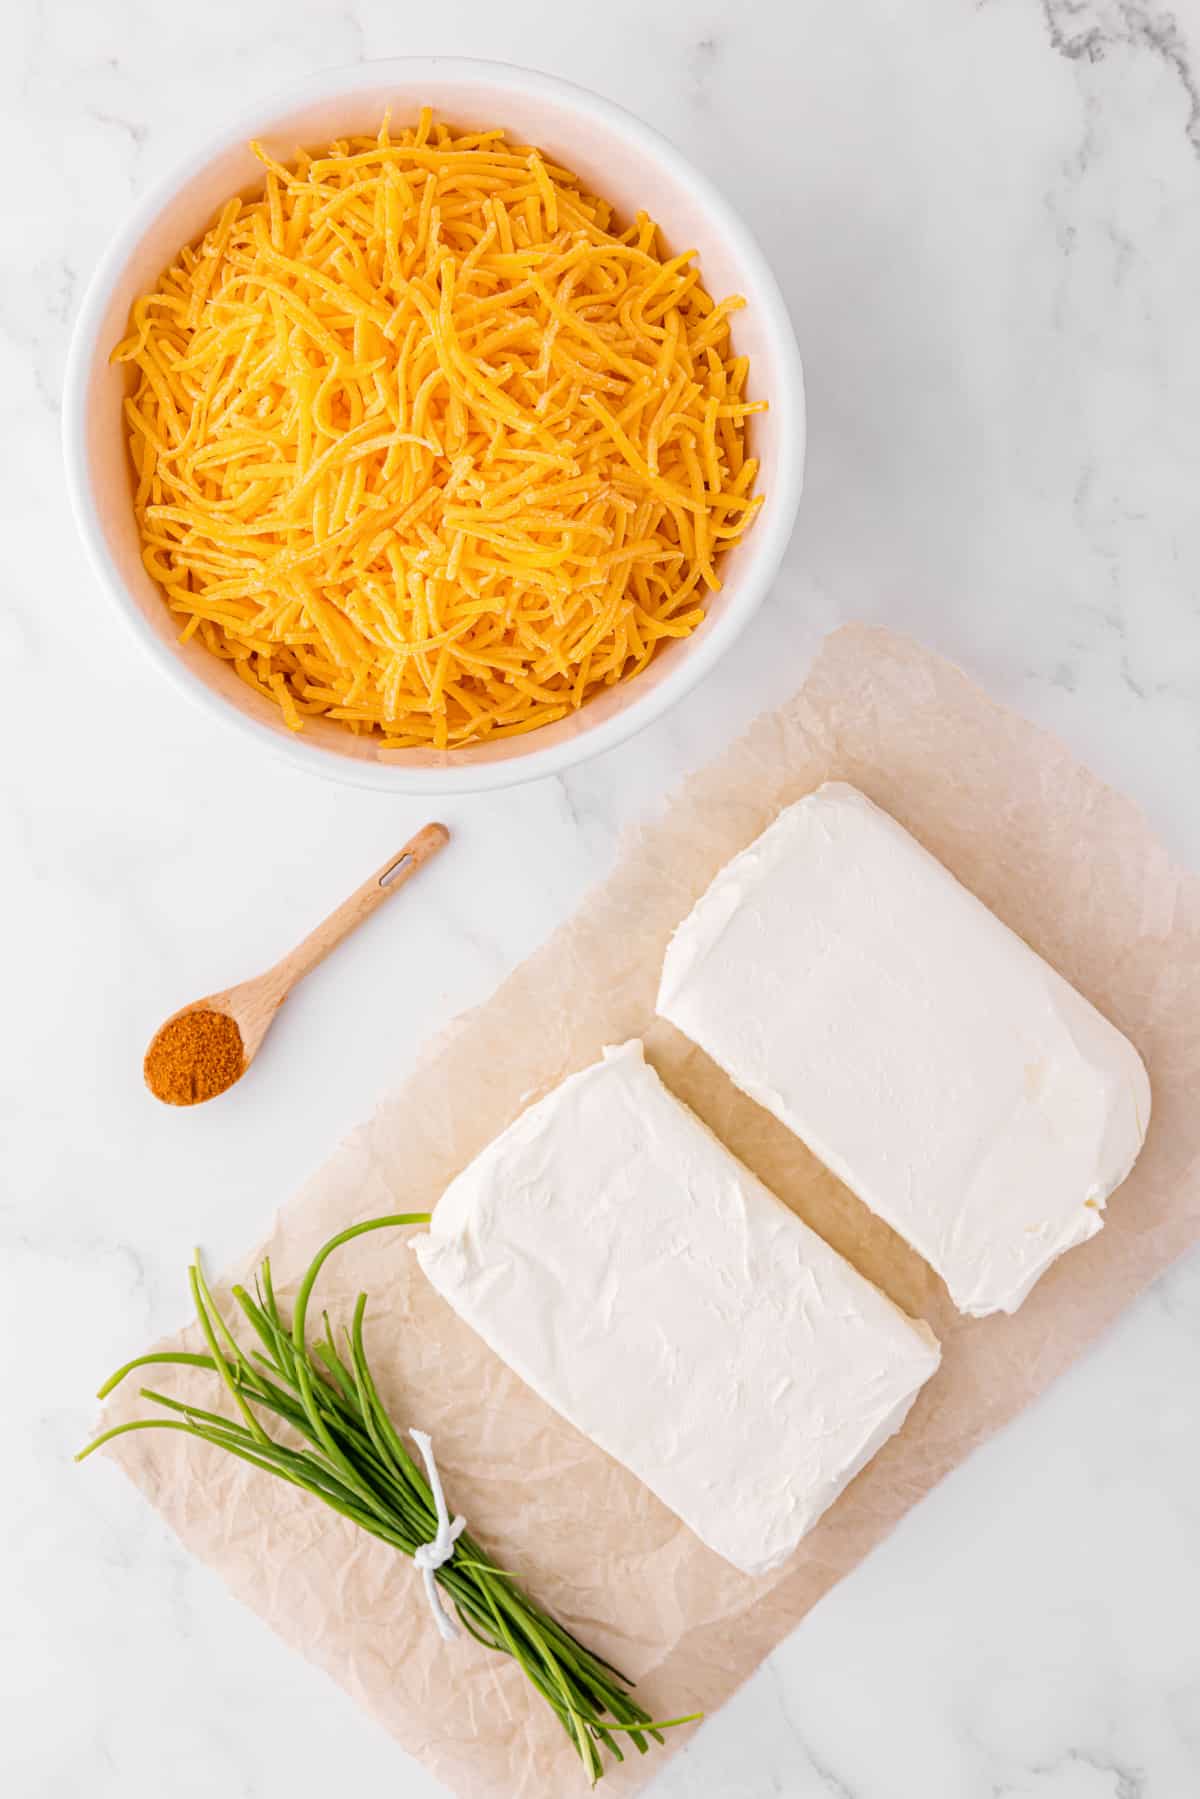 shredded cheese, rosemary sprigs and cream cheese on a cutting board